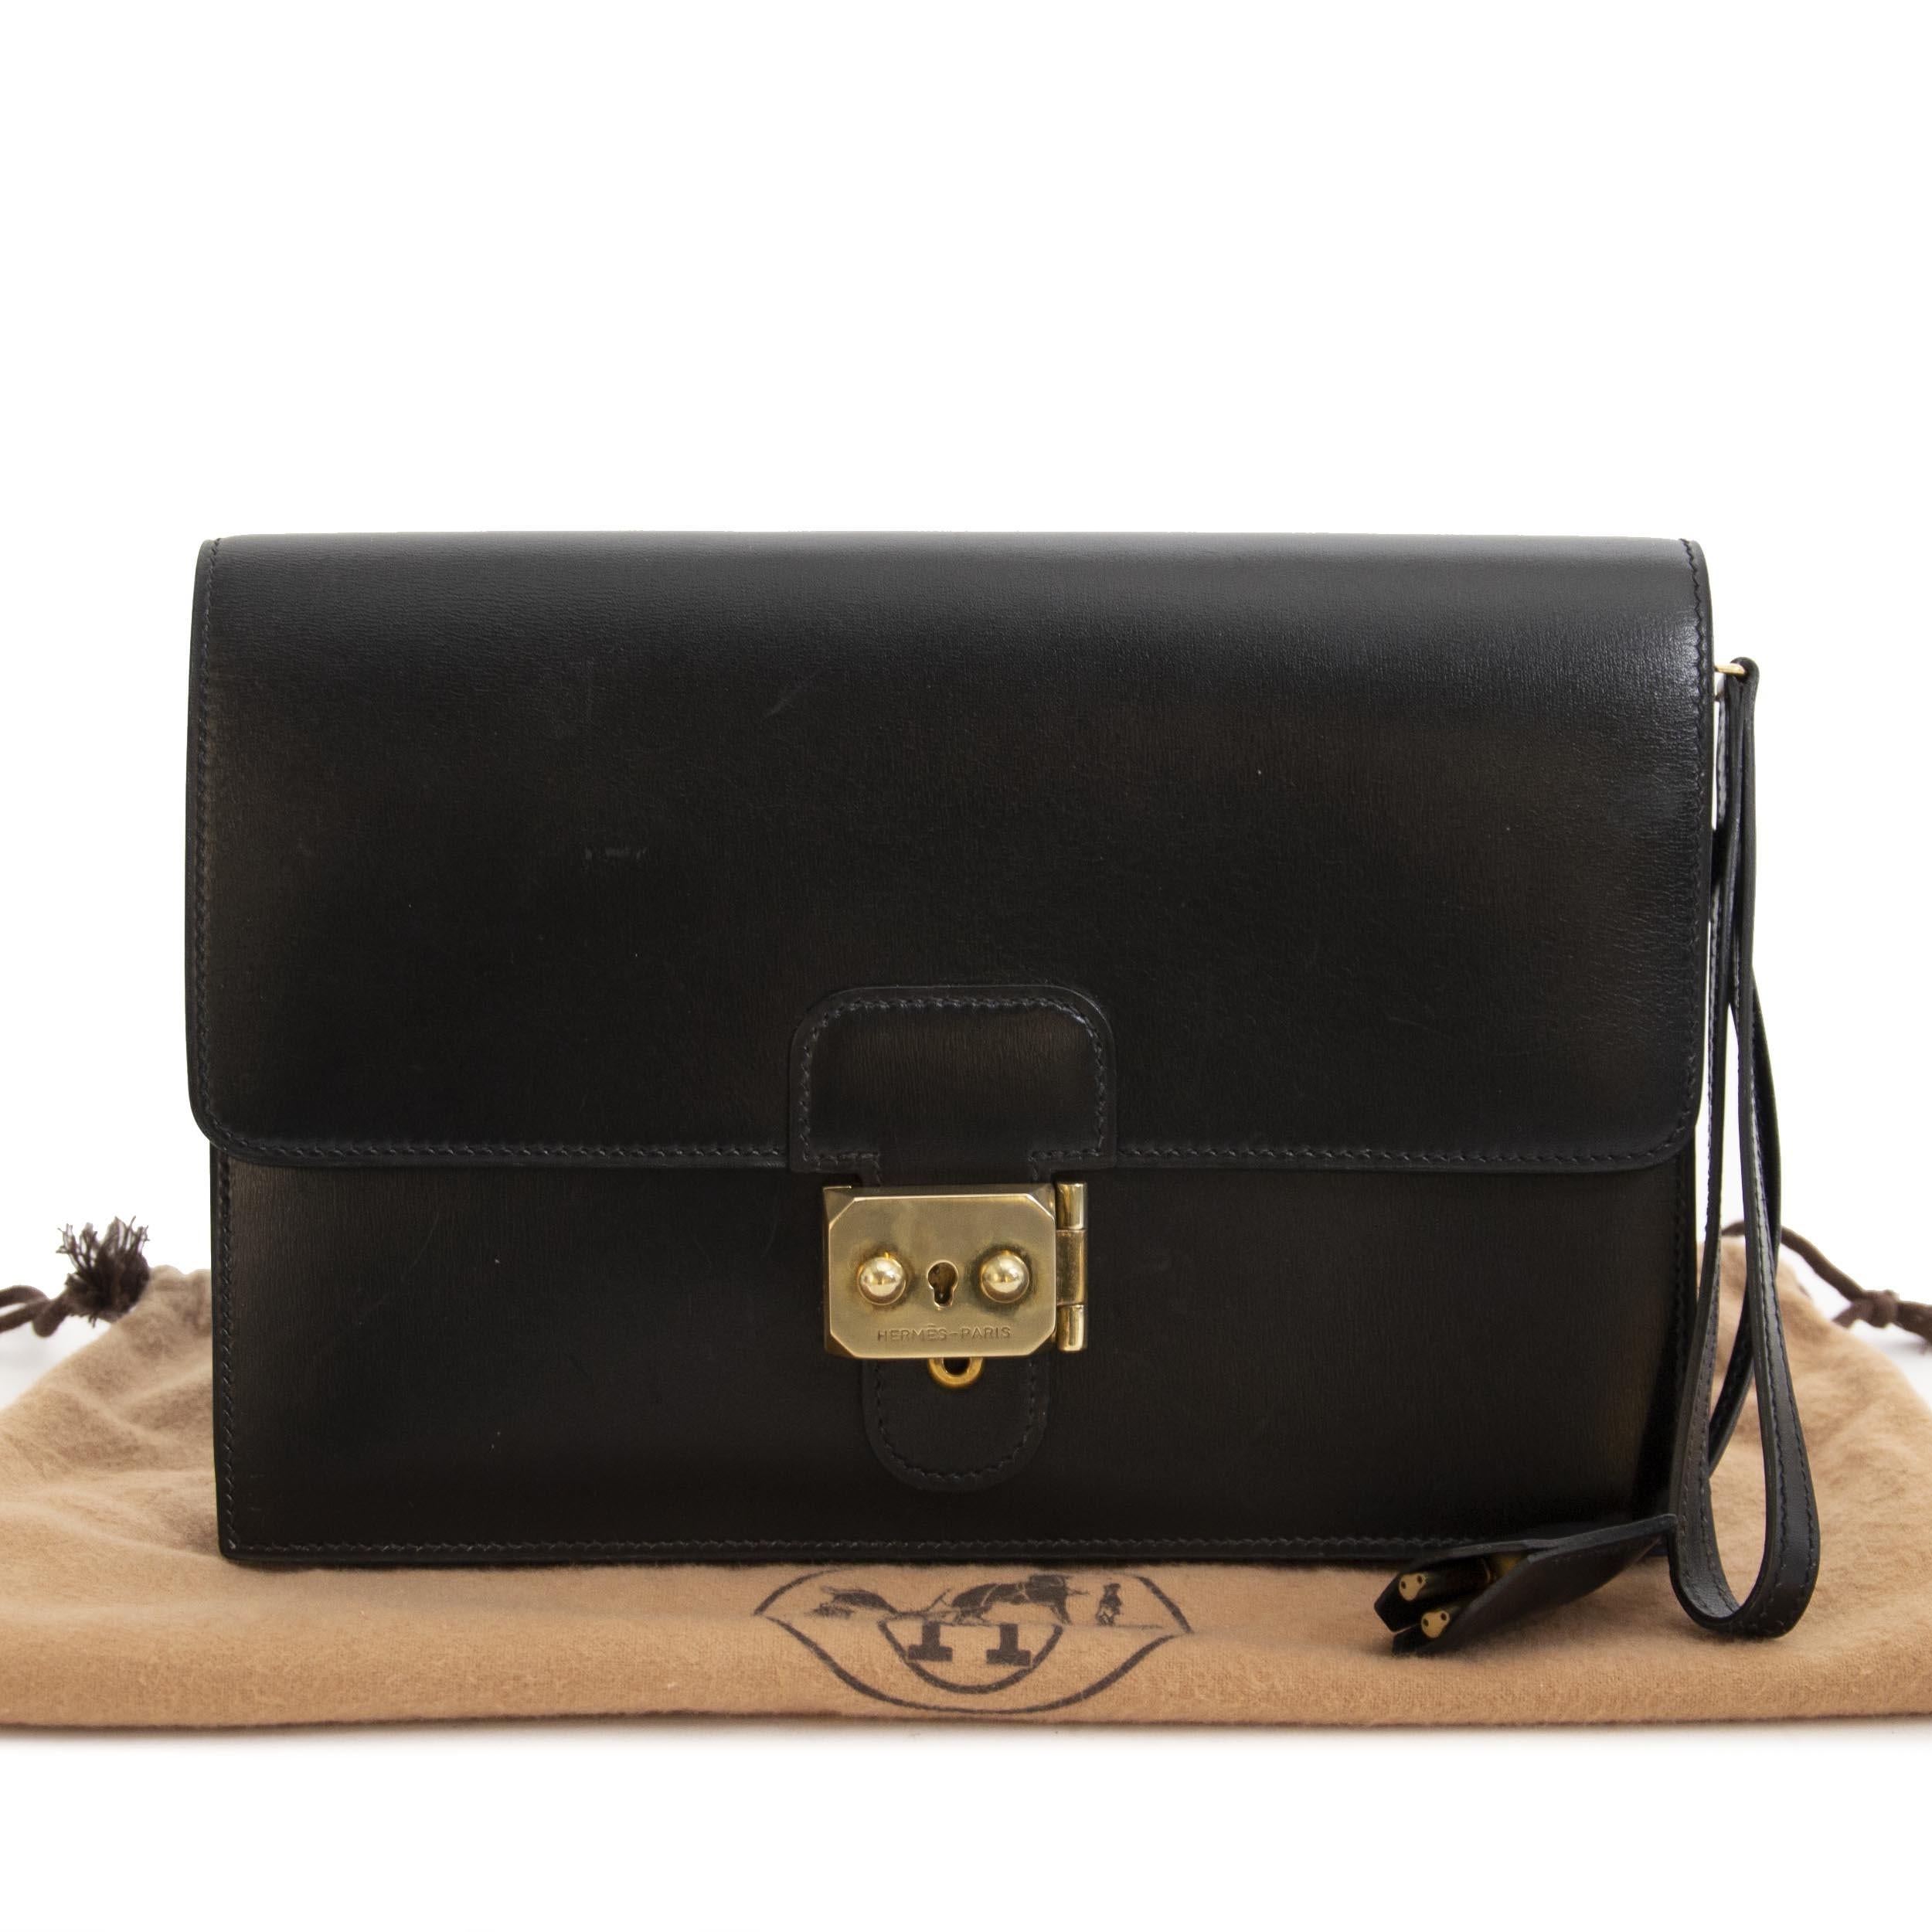 Very Good Condition

Hermes Black Box Calf Pochette Jet

We adore this extremely rare and practical 